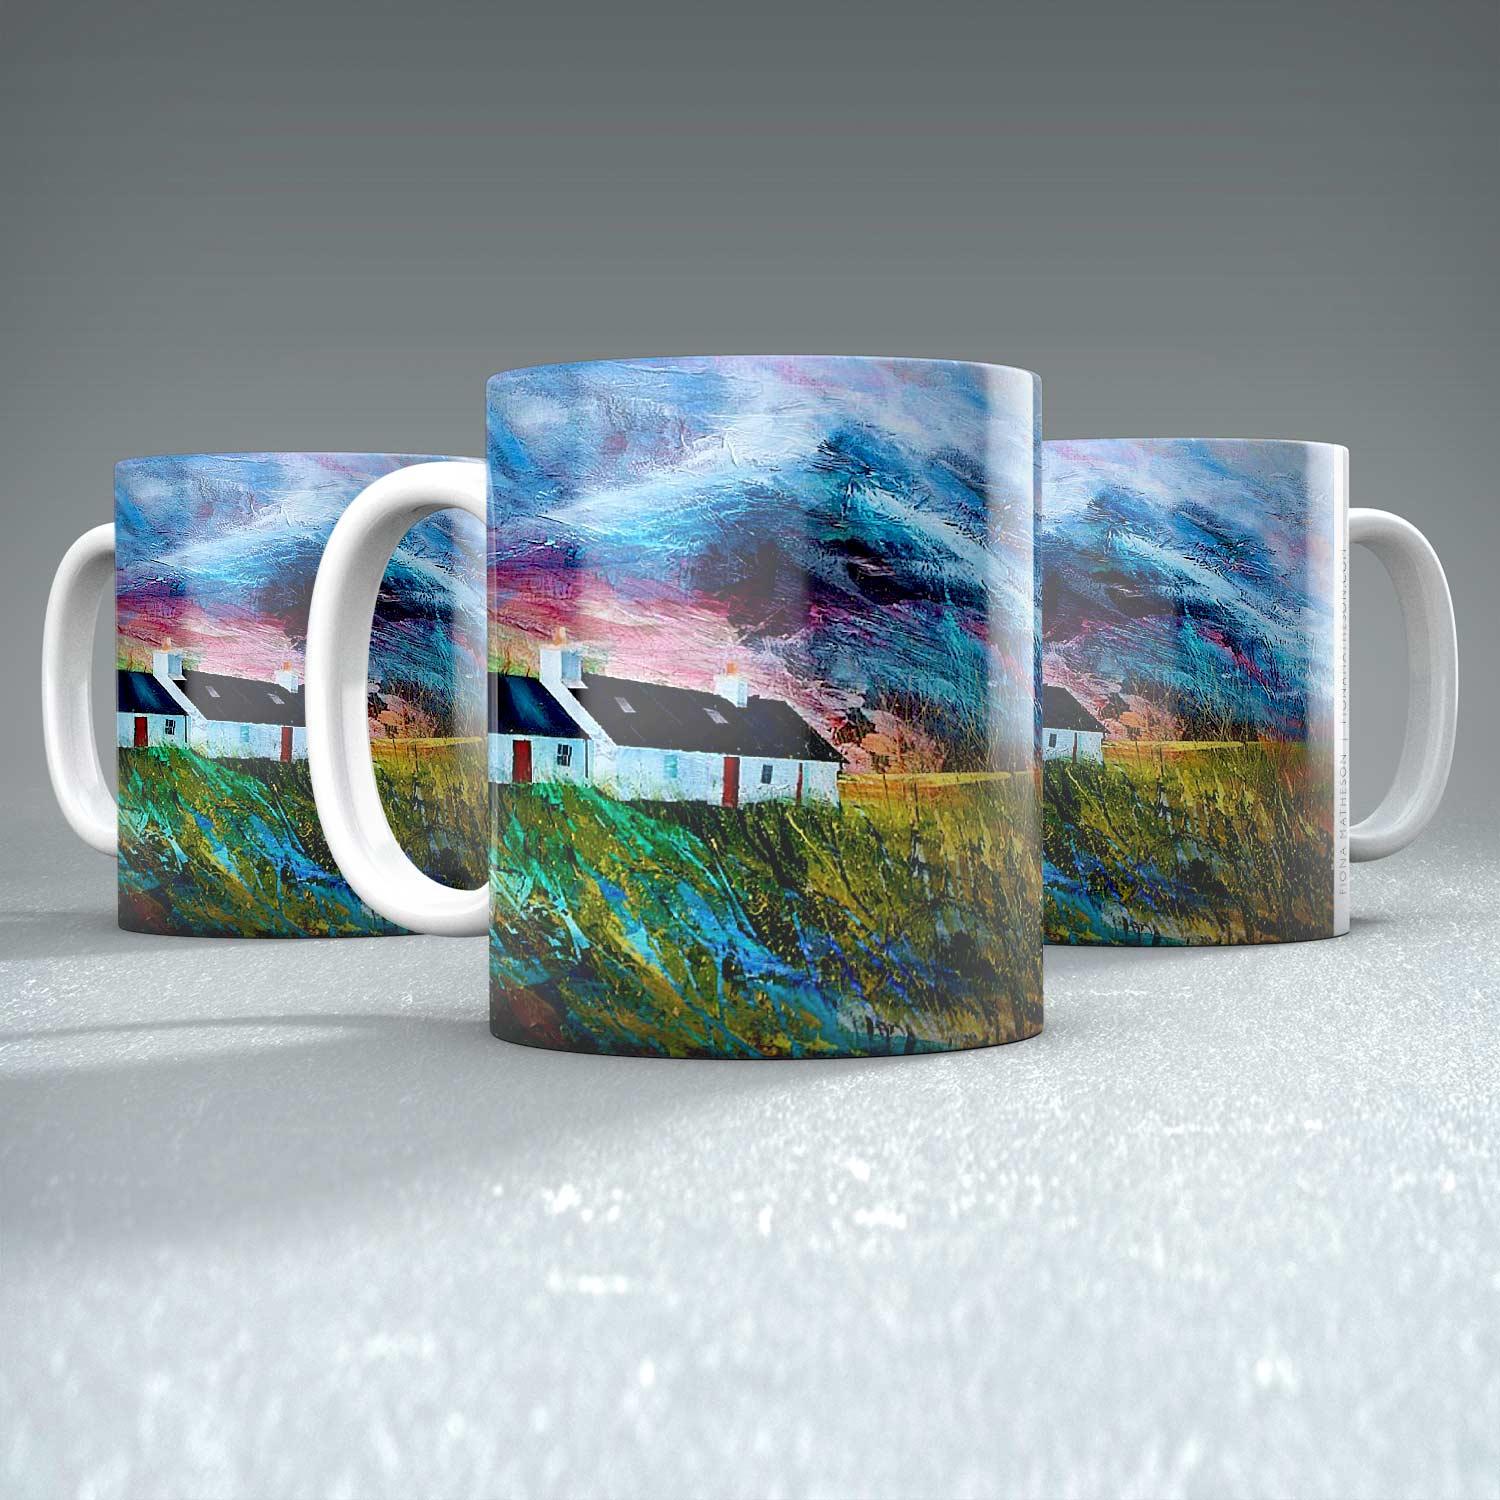 Two Chimneys Mug from an original painting by artist Fiona Matheson